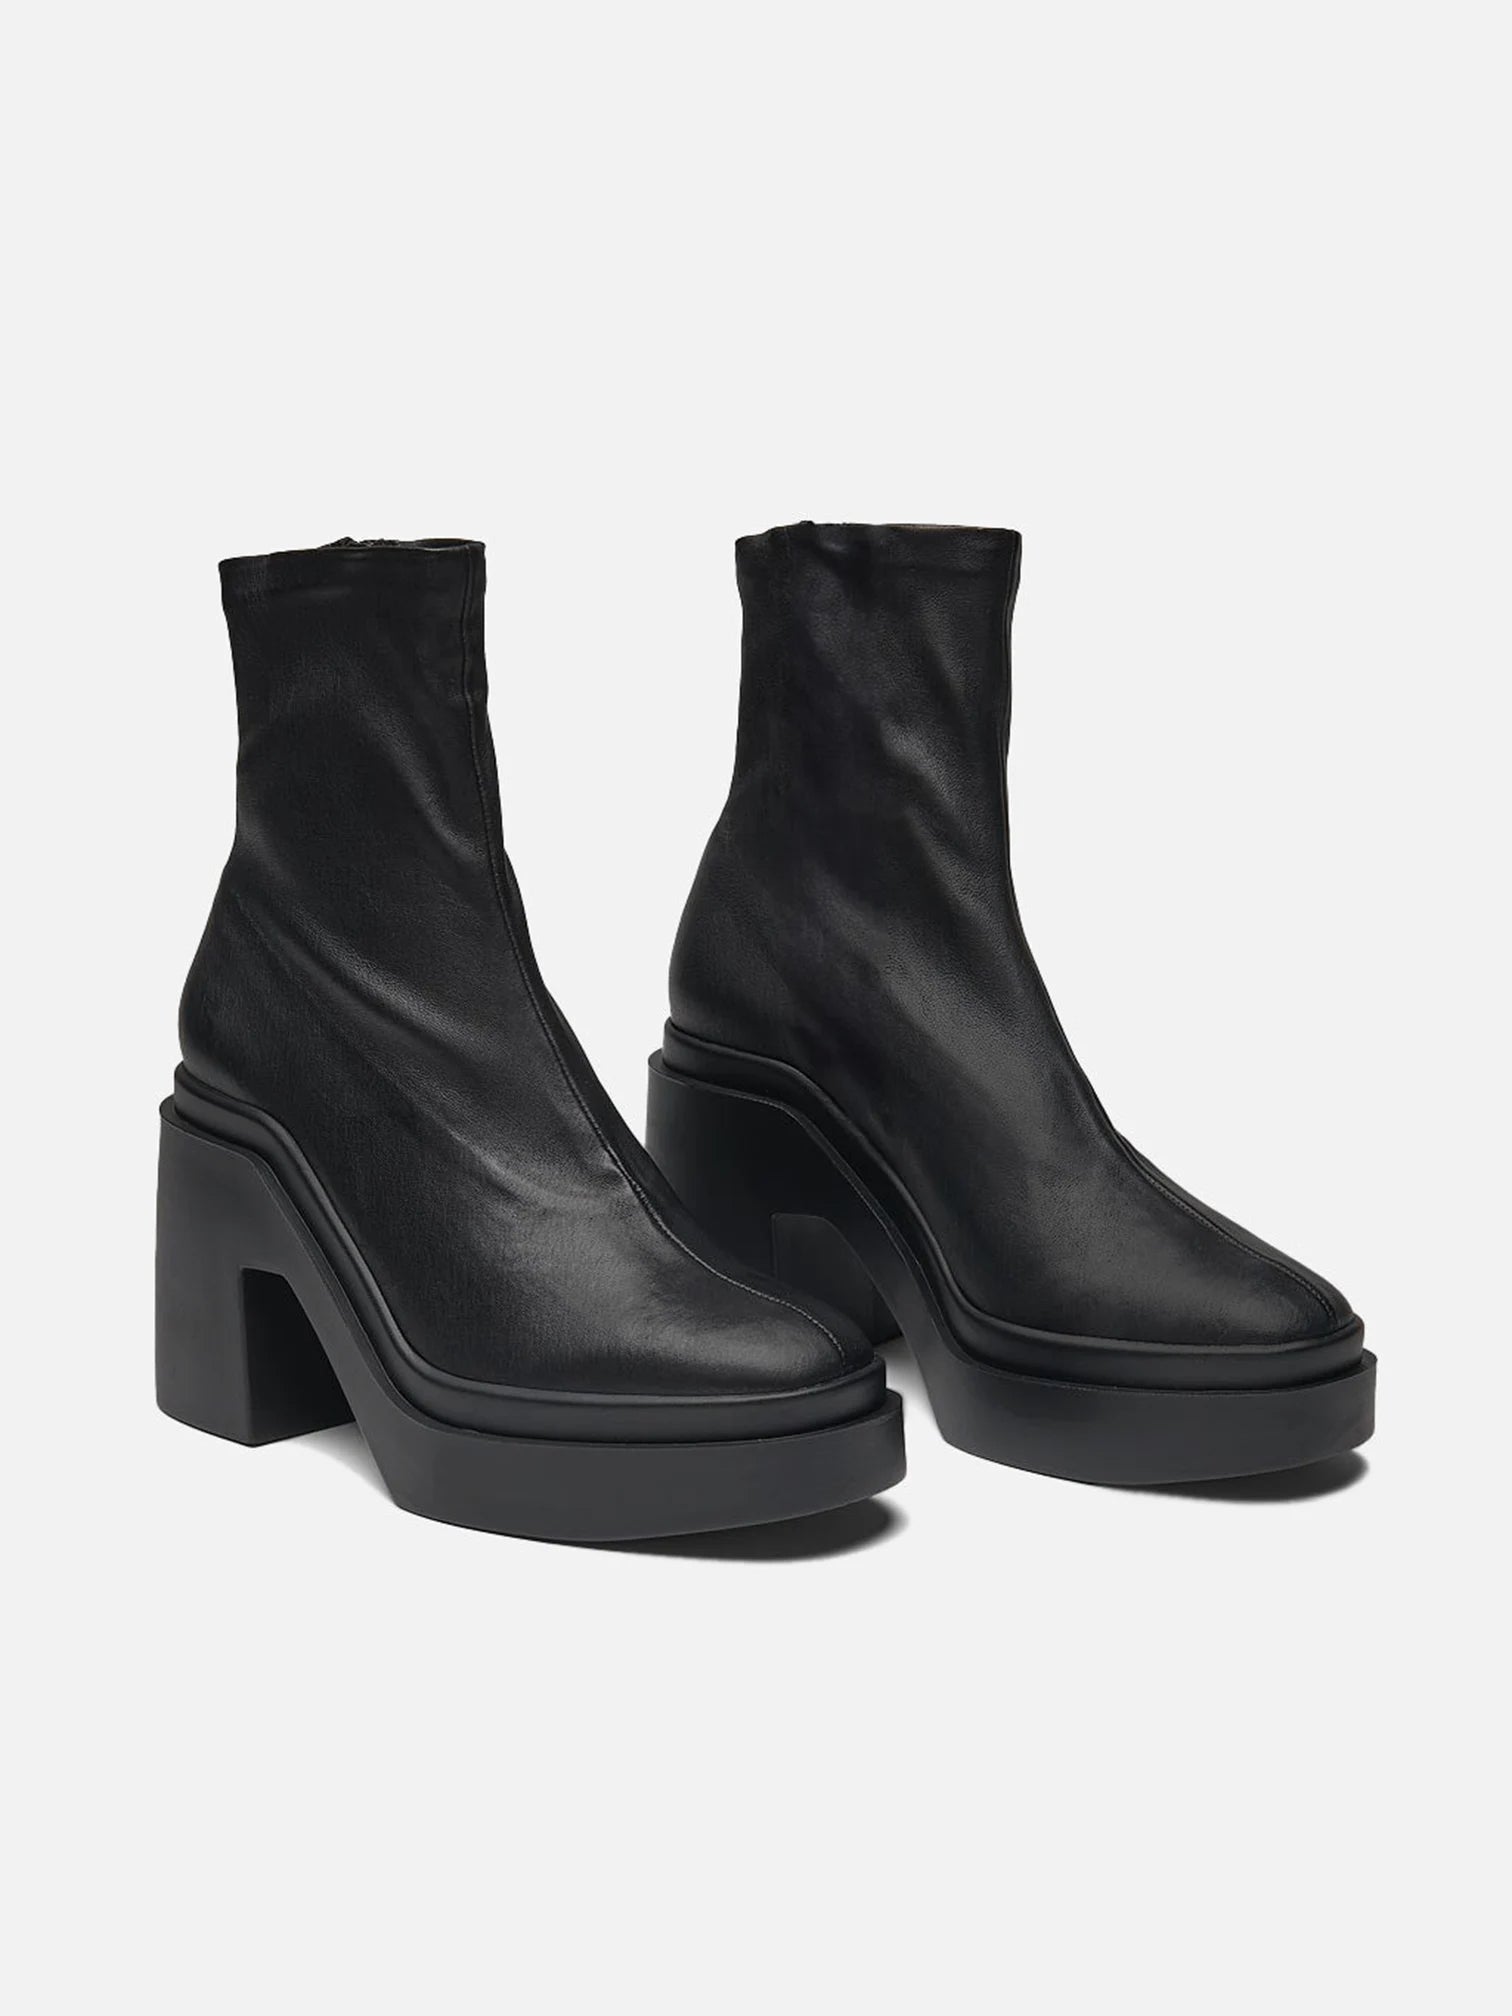 NINA Ankle Boots Black Leather - Clergerie Paris - Europe